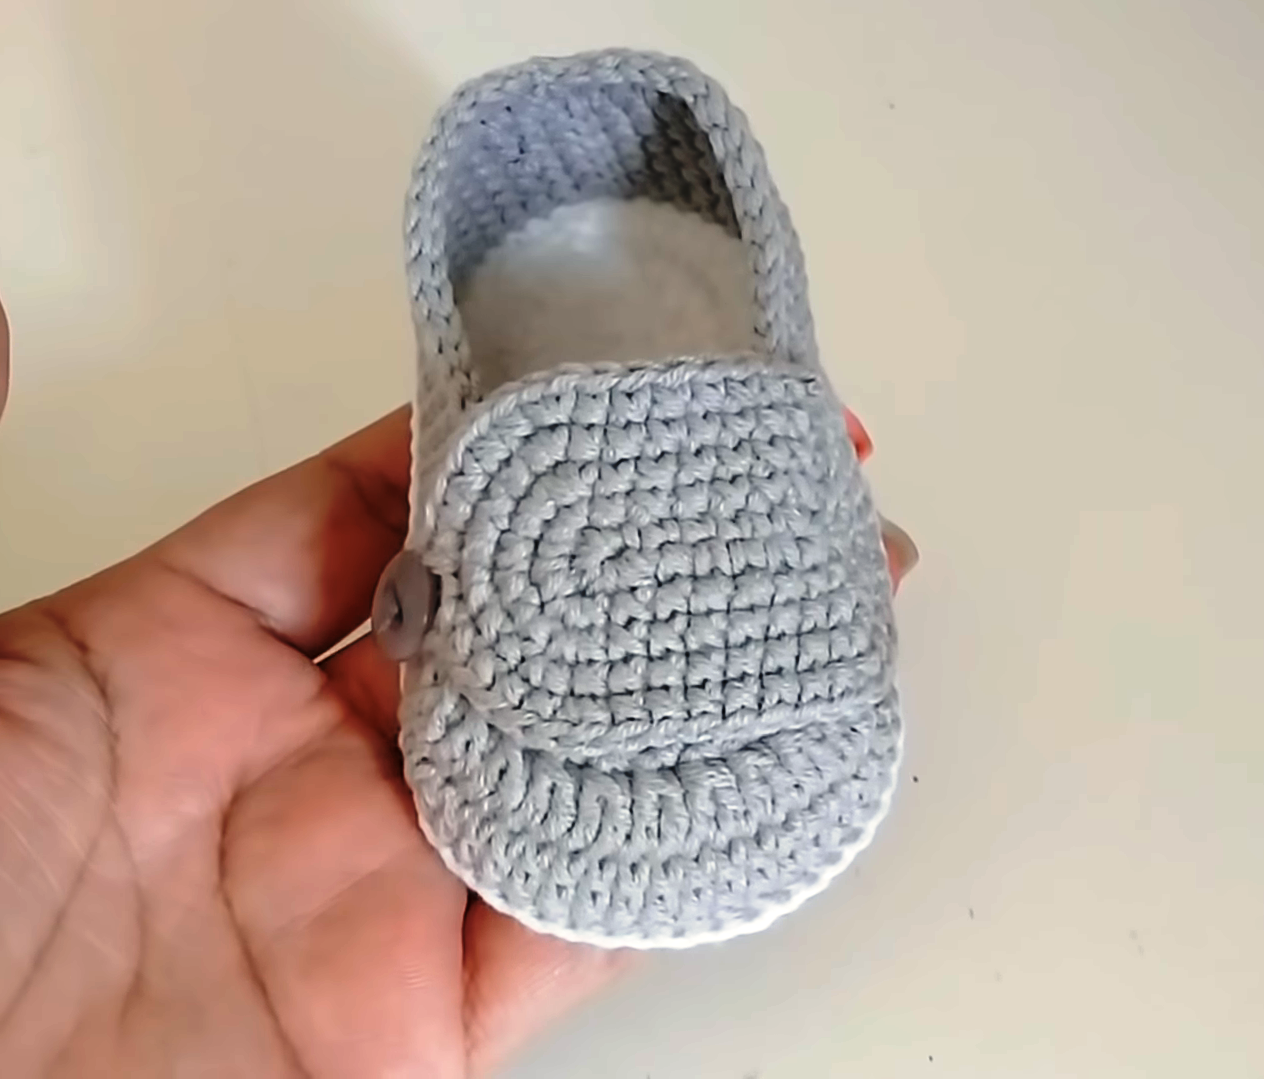 baby shoes 3 to 6 months